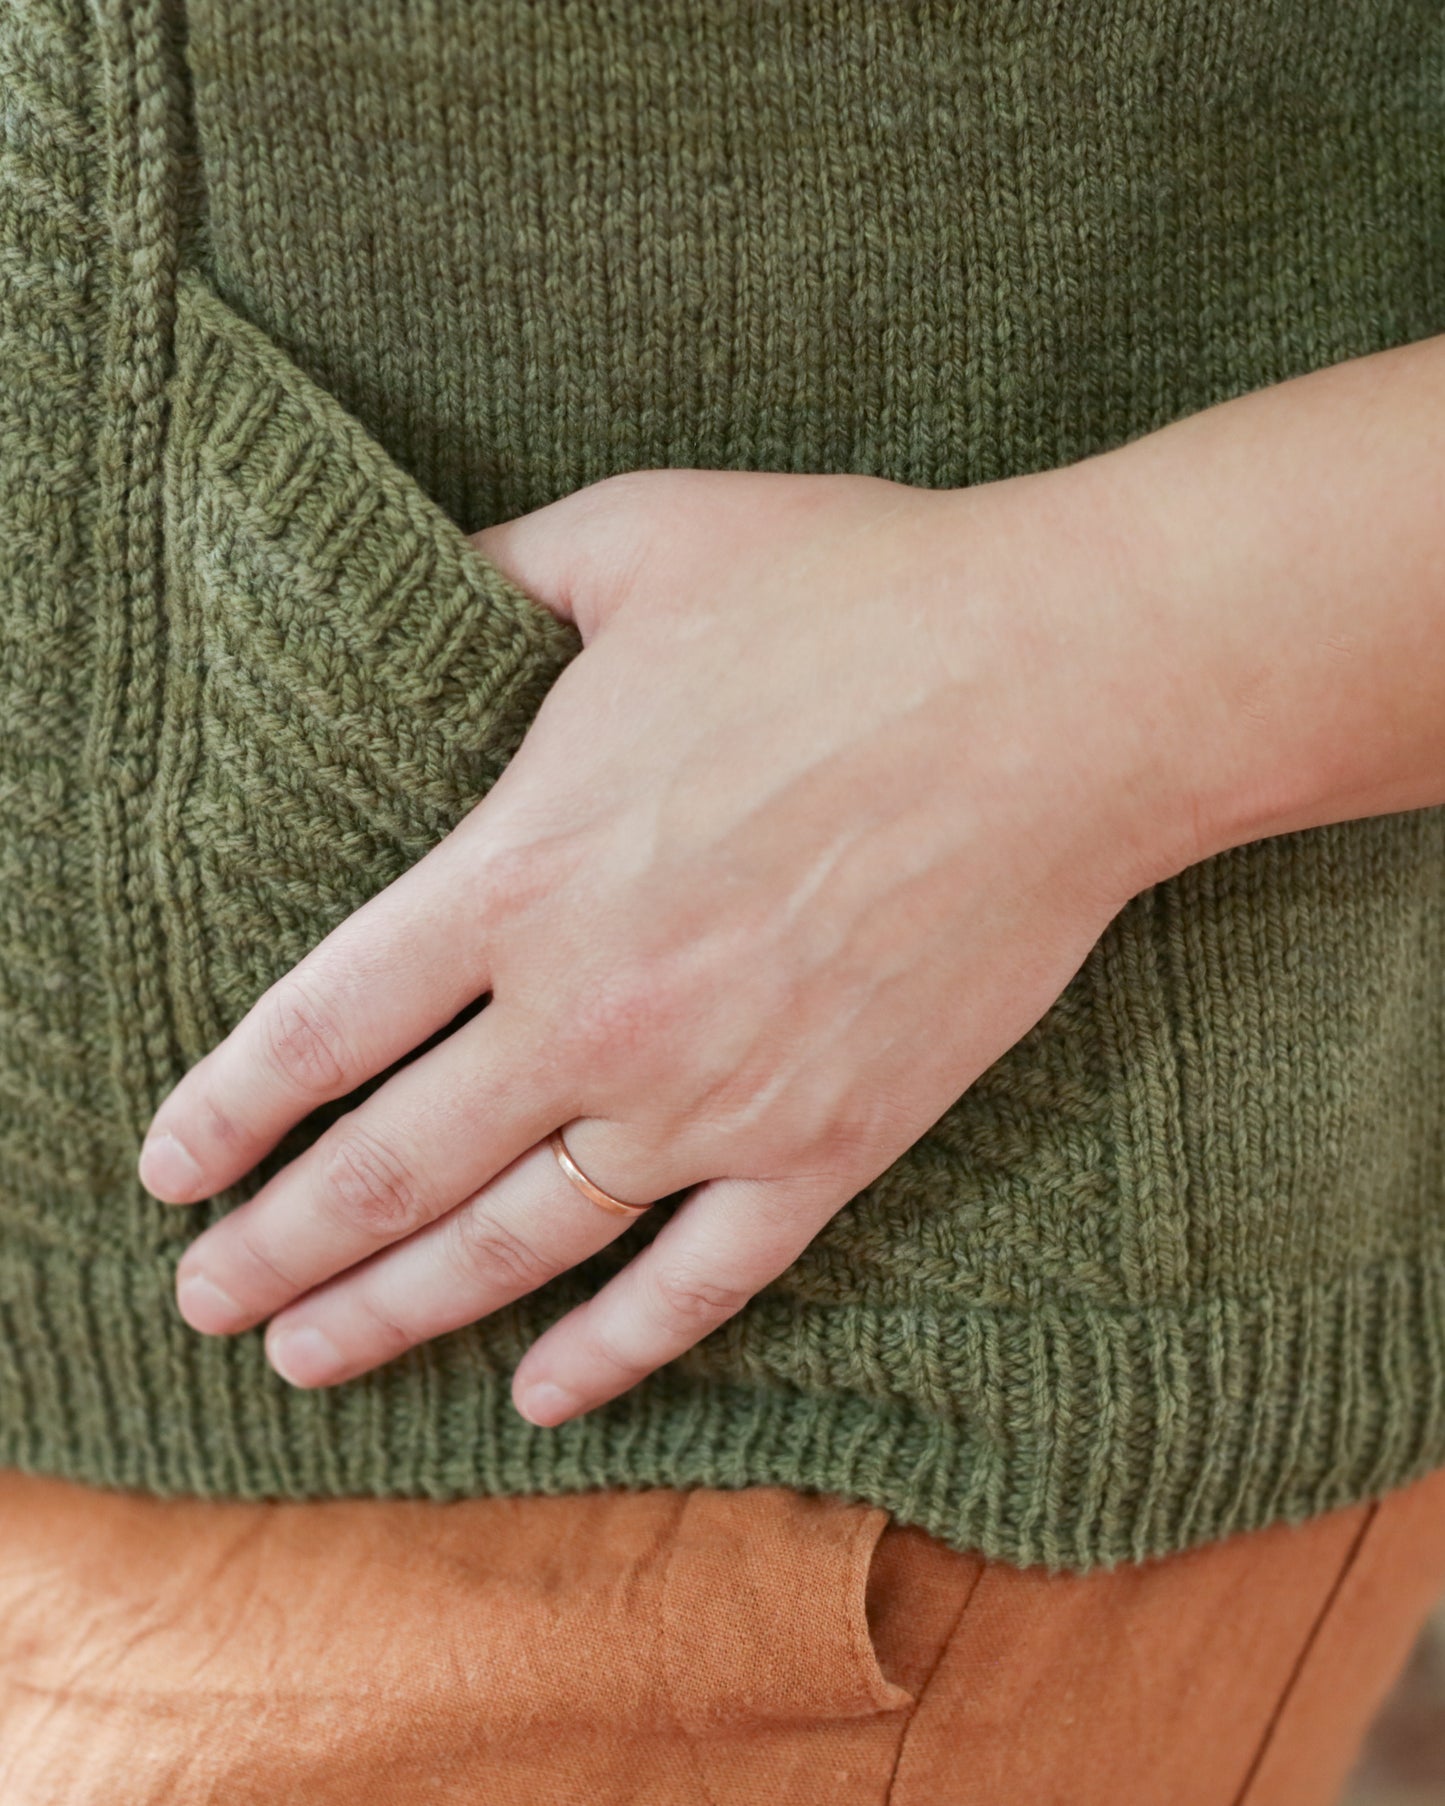 Seen close up, Jen has her thumb tucked in the pocket of her hand knit, green cardigan. The diagonal of the pocket is approximately the length of her hand.